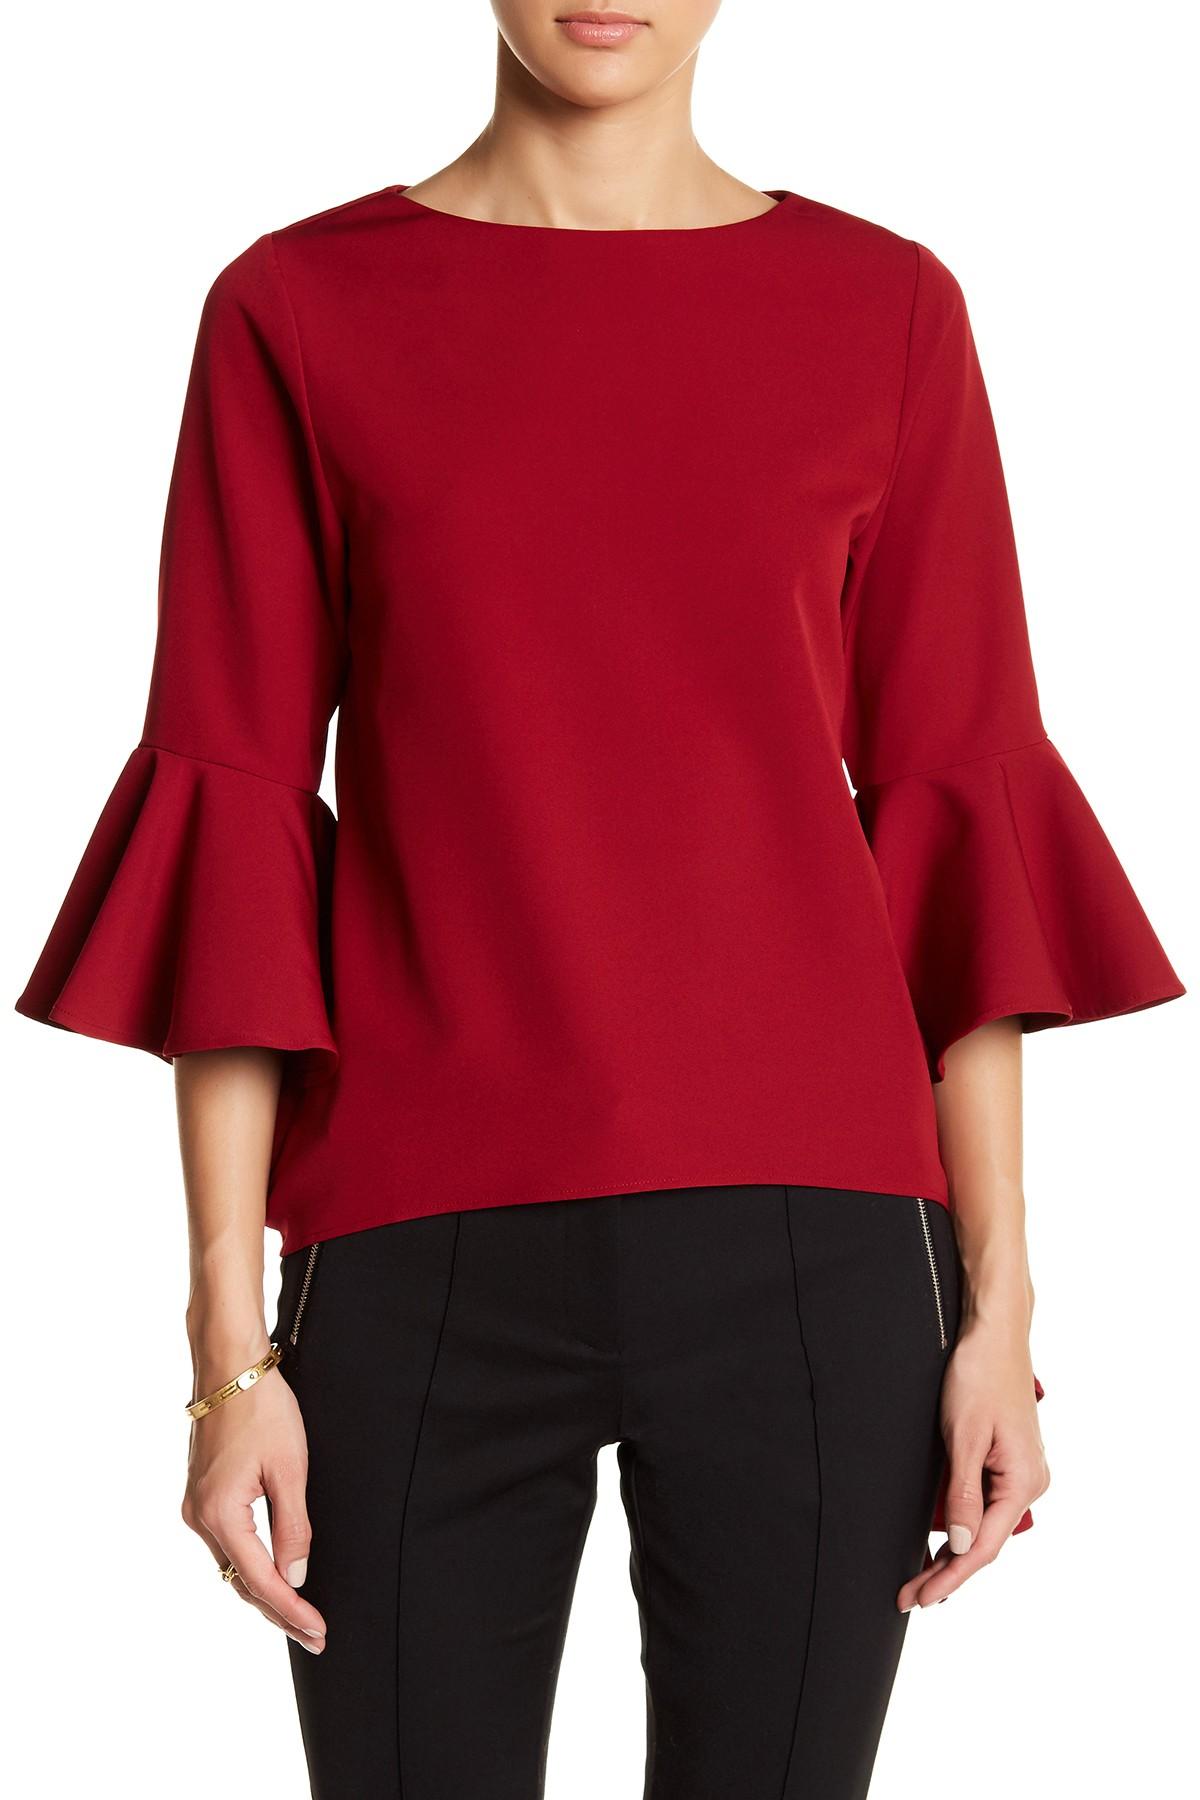 Gracia Bell Sleeve Hi-lo Blouse in Red | Lyst